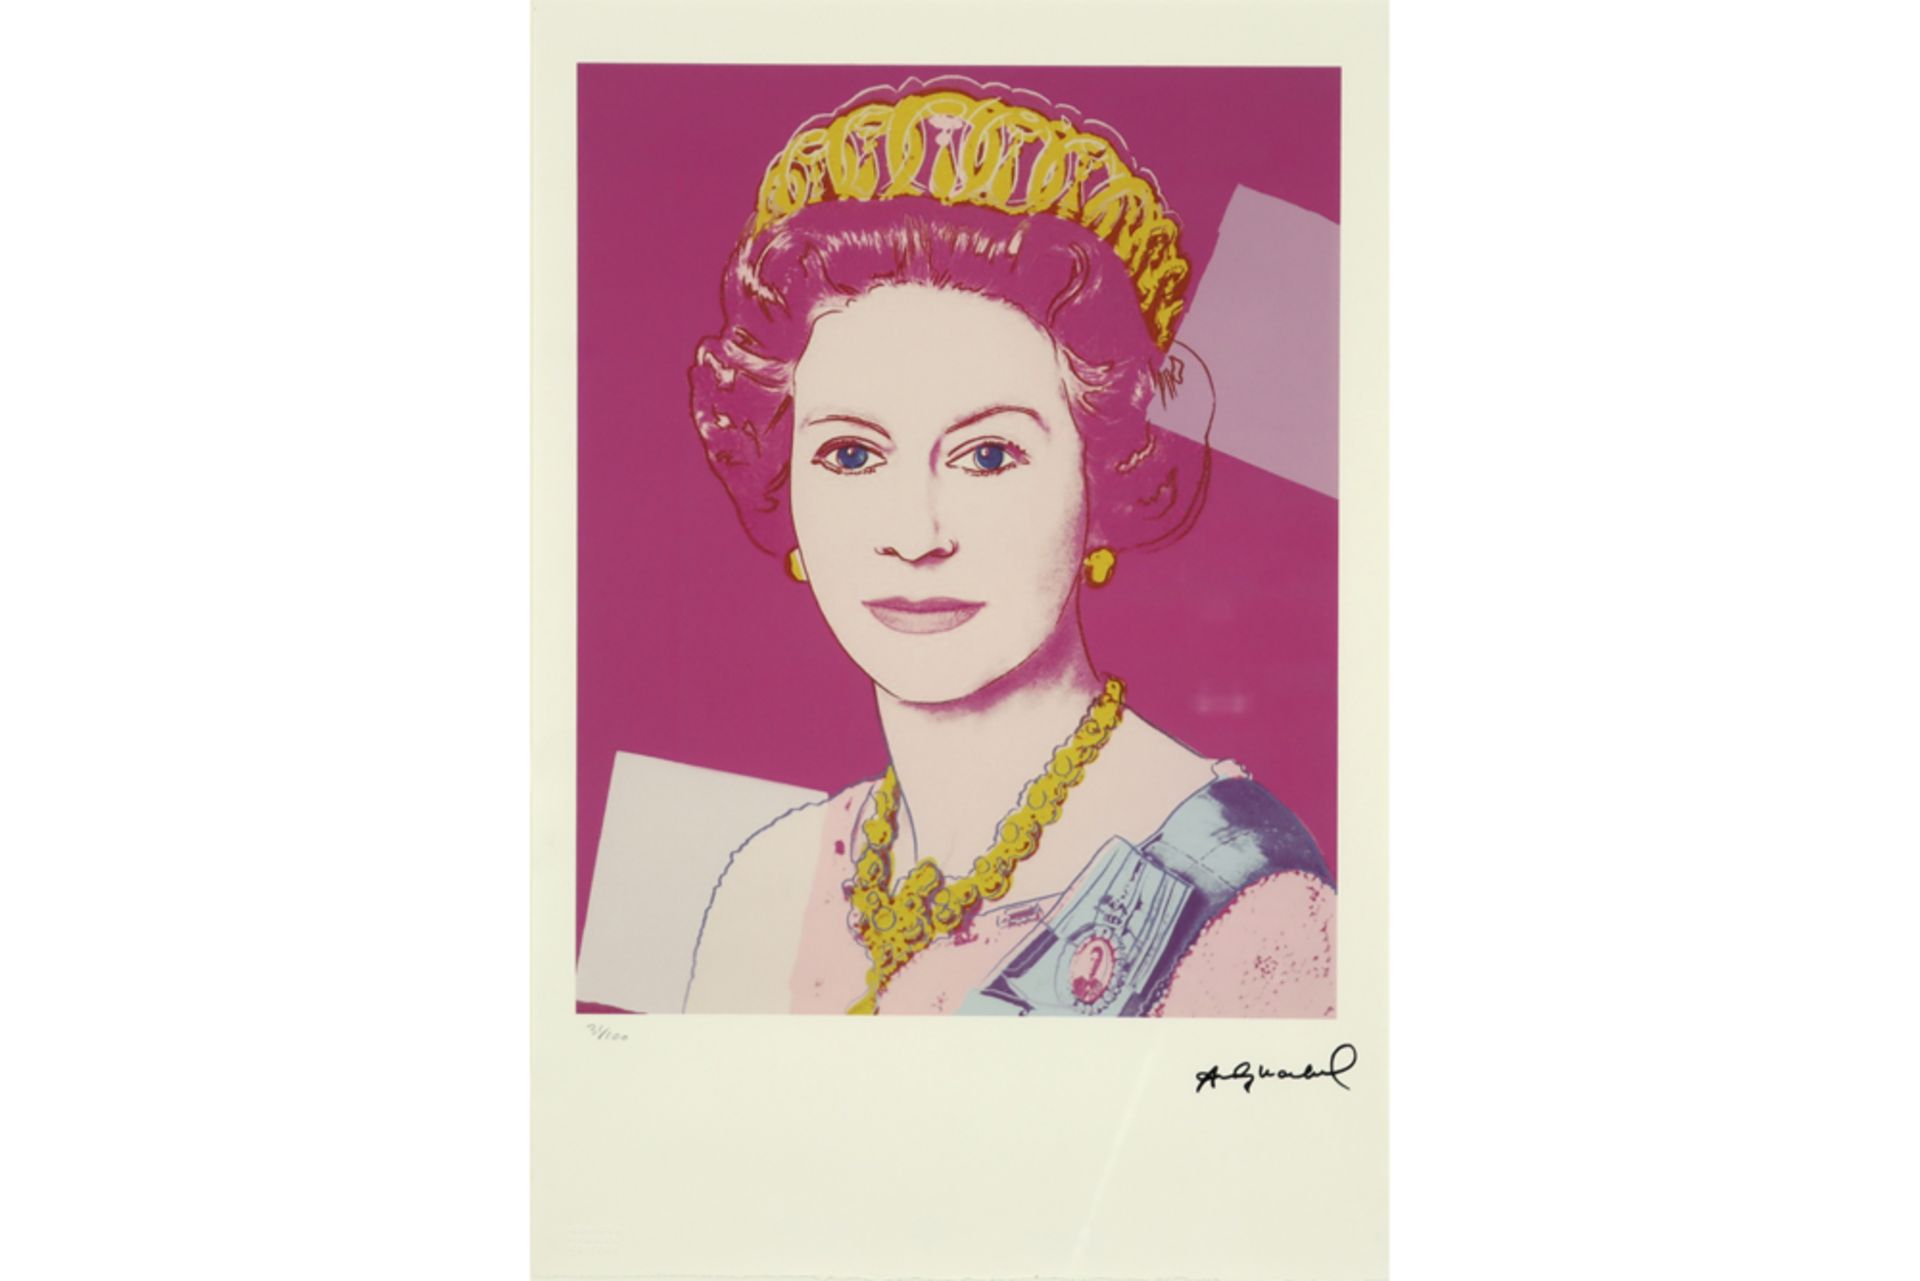 plate signed Andy Warhol "Queen Elizabeth" lithograph printed in colors from the portfolio "Reigning